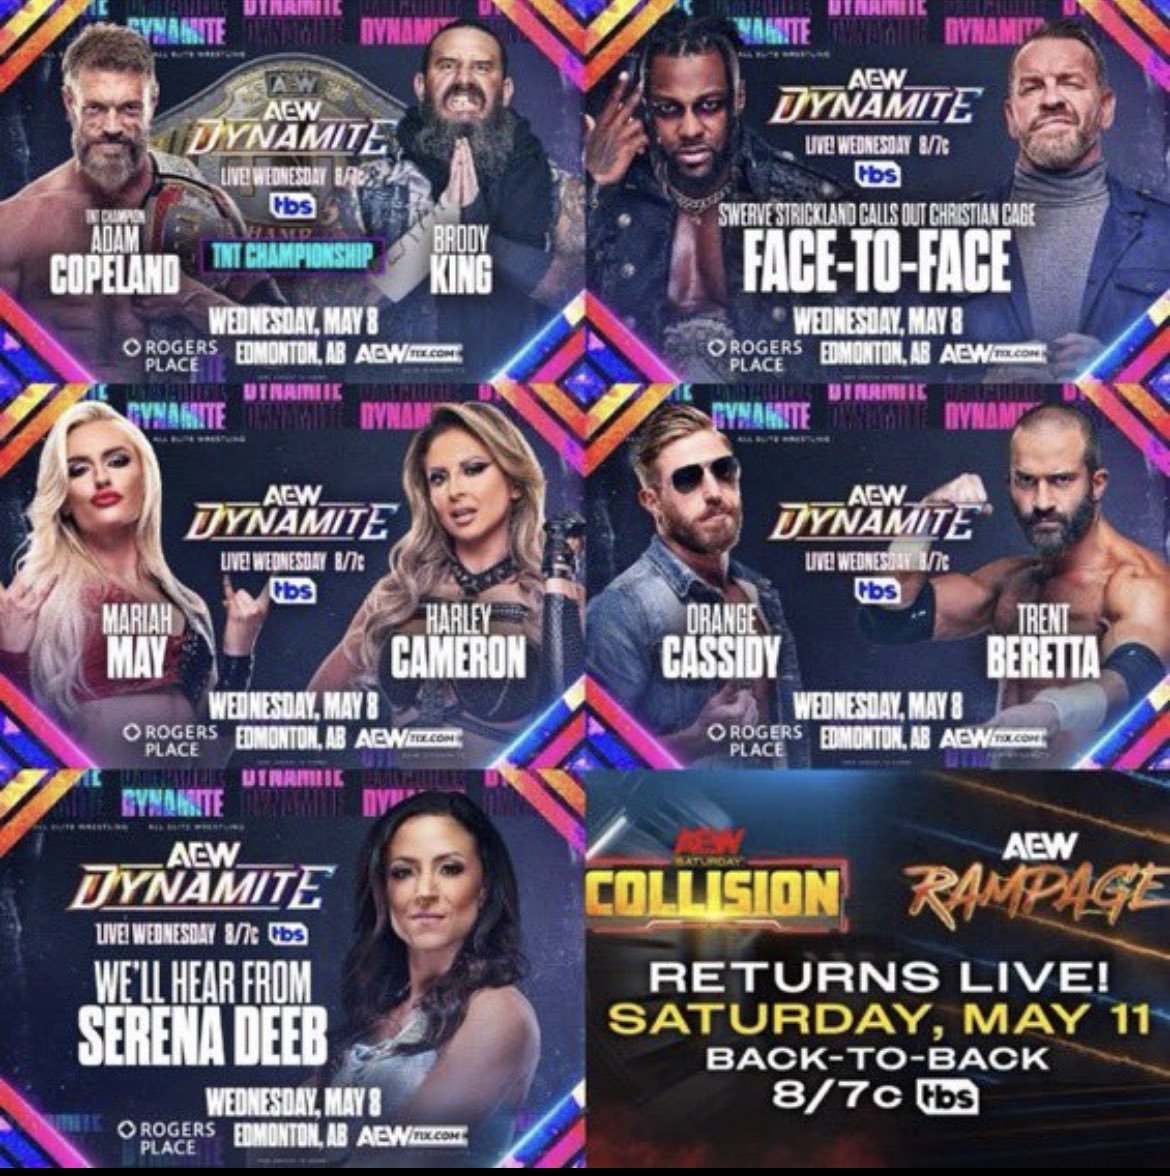 You've waited for OC/Beretta for YEARS.

You told me no one deserves it more than Swerve and Christian.

You told me Brody needs his moment.

You told me Deeb might be the best female wrestler.

You told me Harley and Mariah have the skills to be the future.

What a shit card.